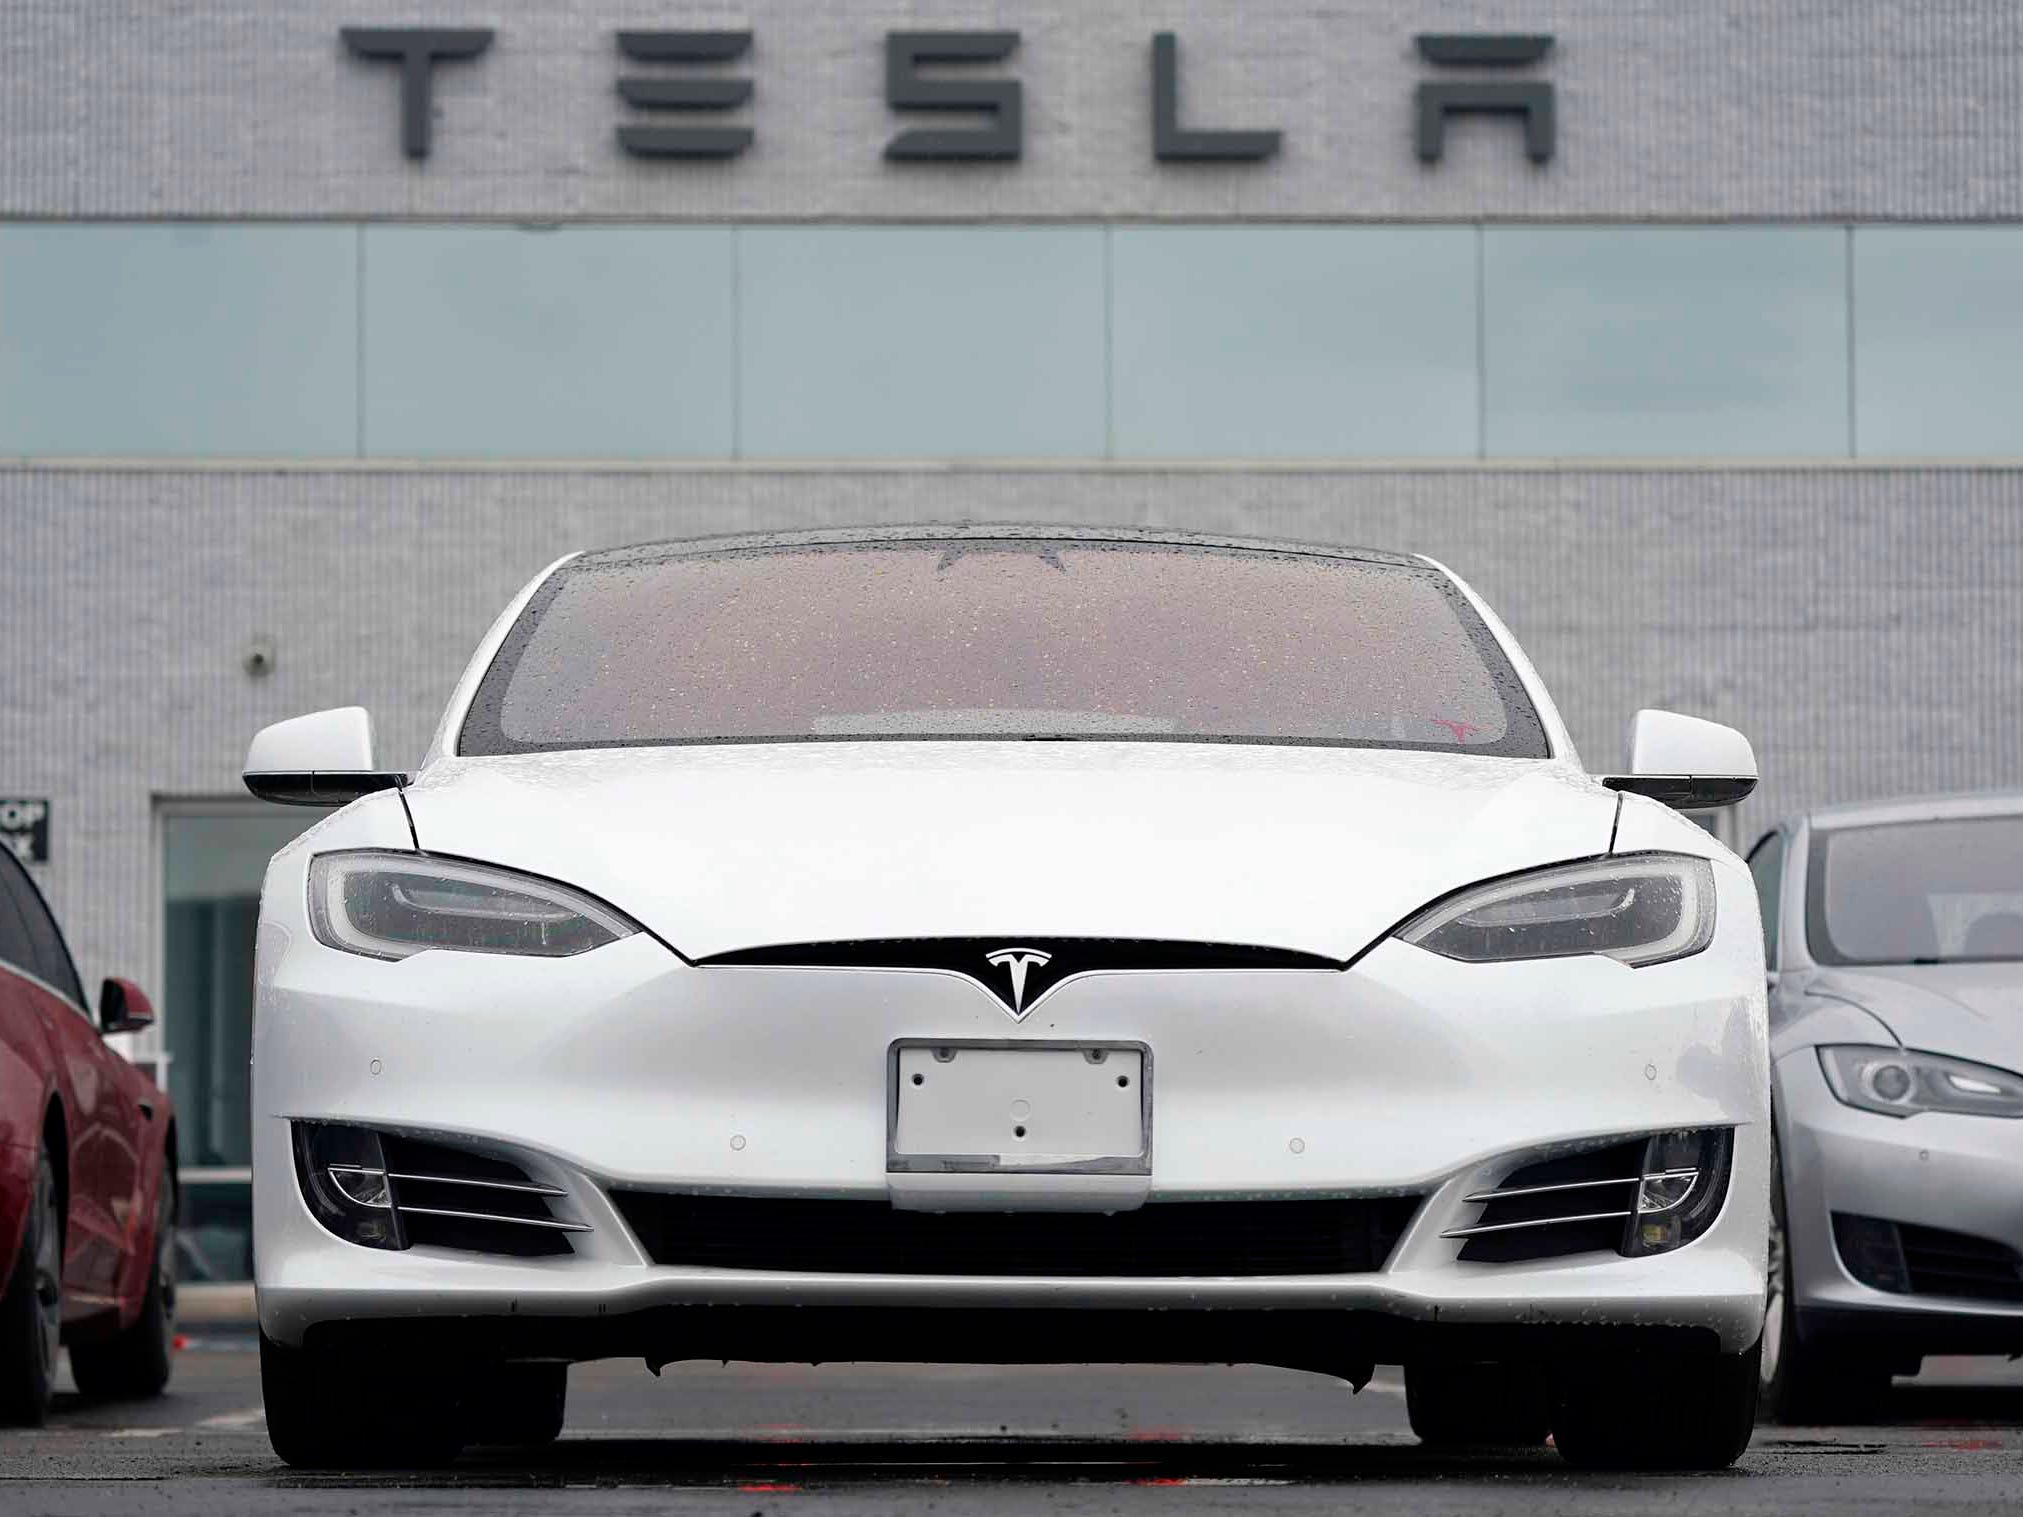 A white Tesla Model S is pictured at a Tesla facility in Littleton, Colorado.